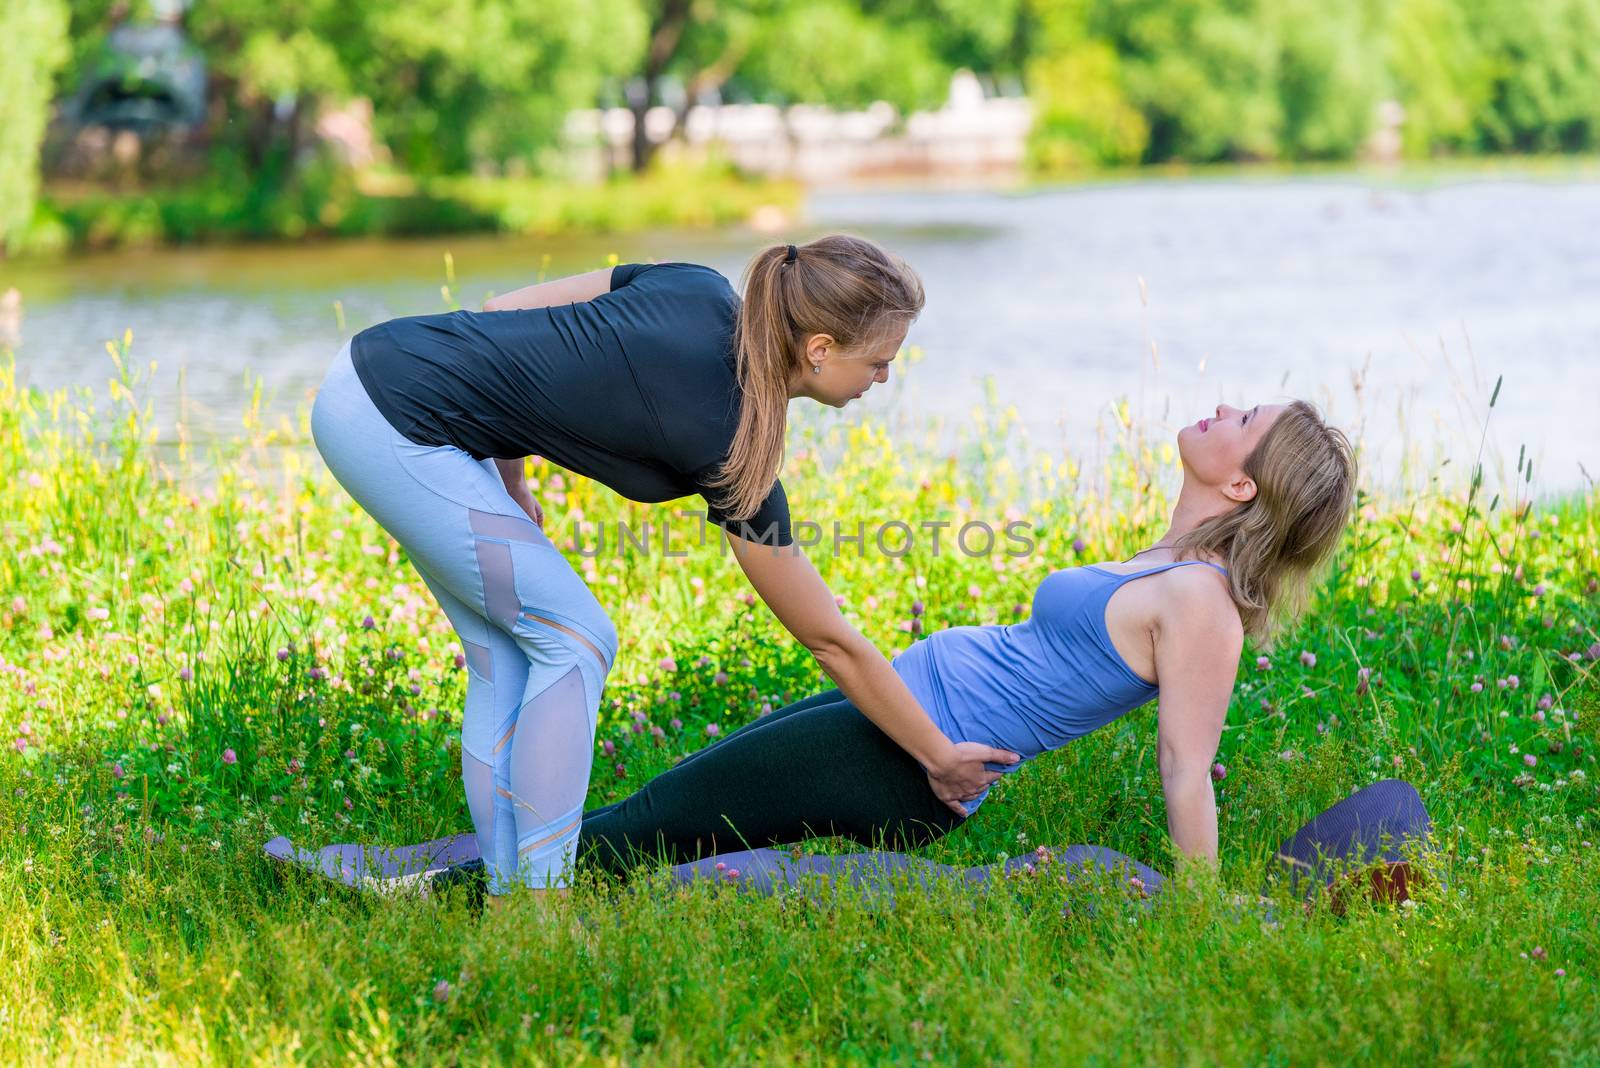 individual yoga classes with a personal trainer in the park